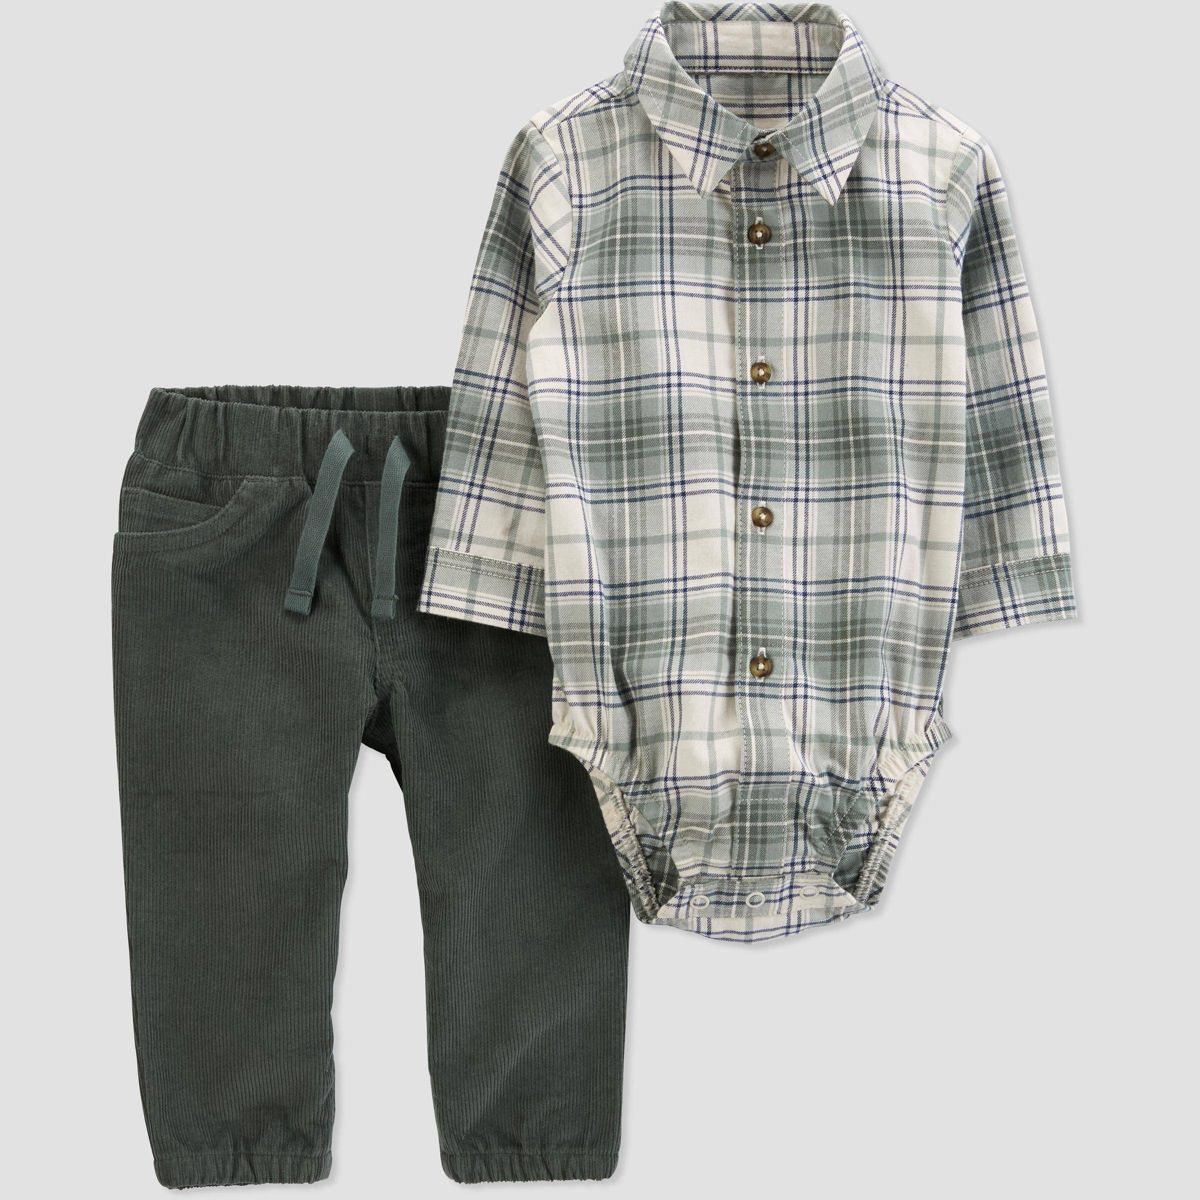 Carter's Just One You®️ Baby Boys' Plaid Top & Pants Set - Green | Target